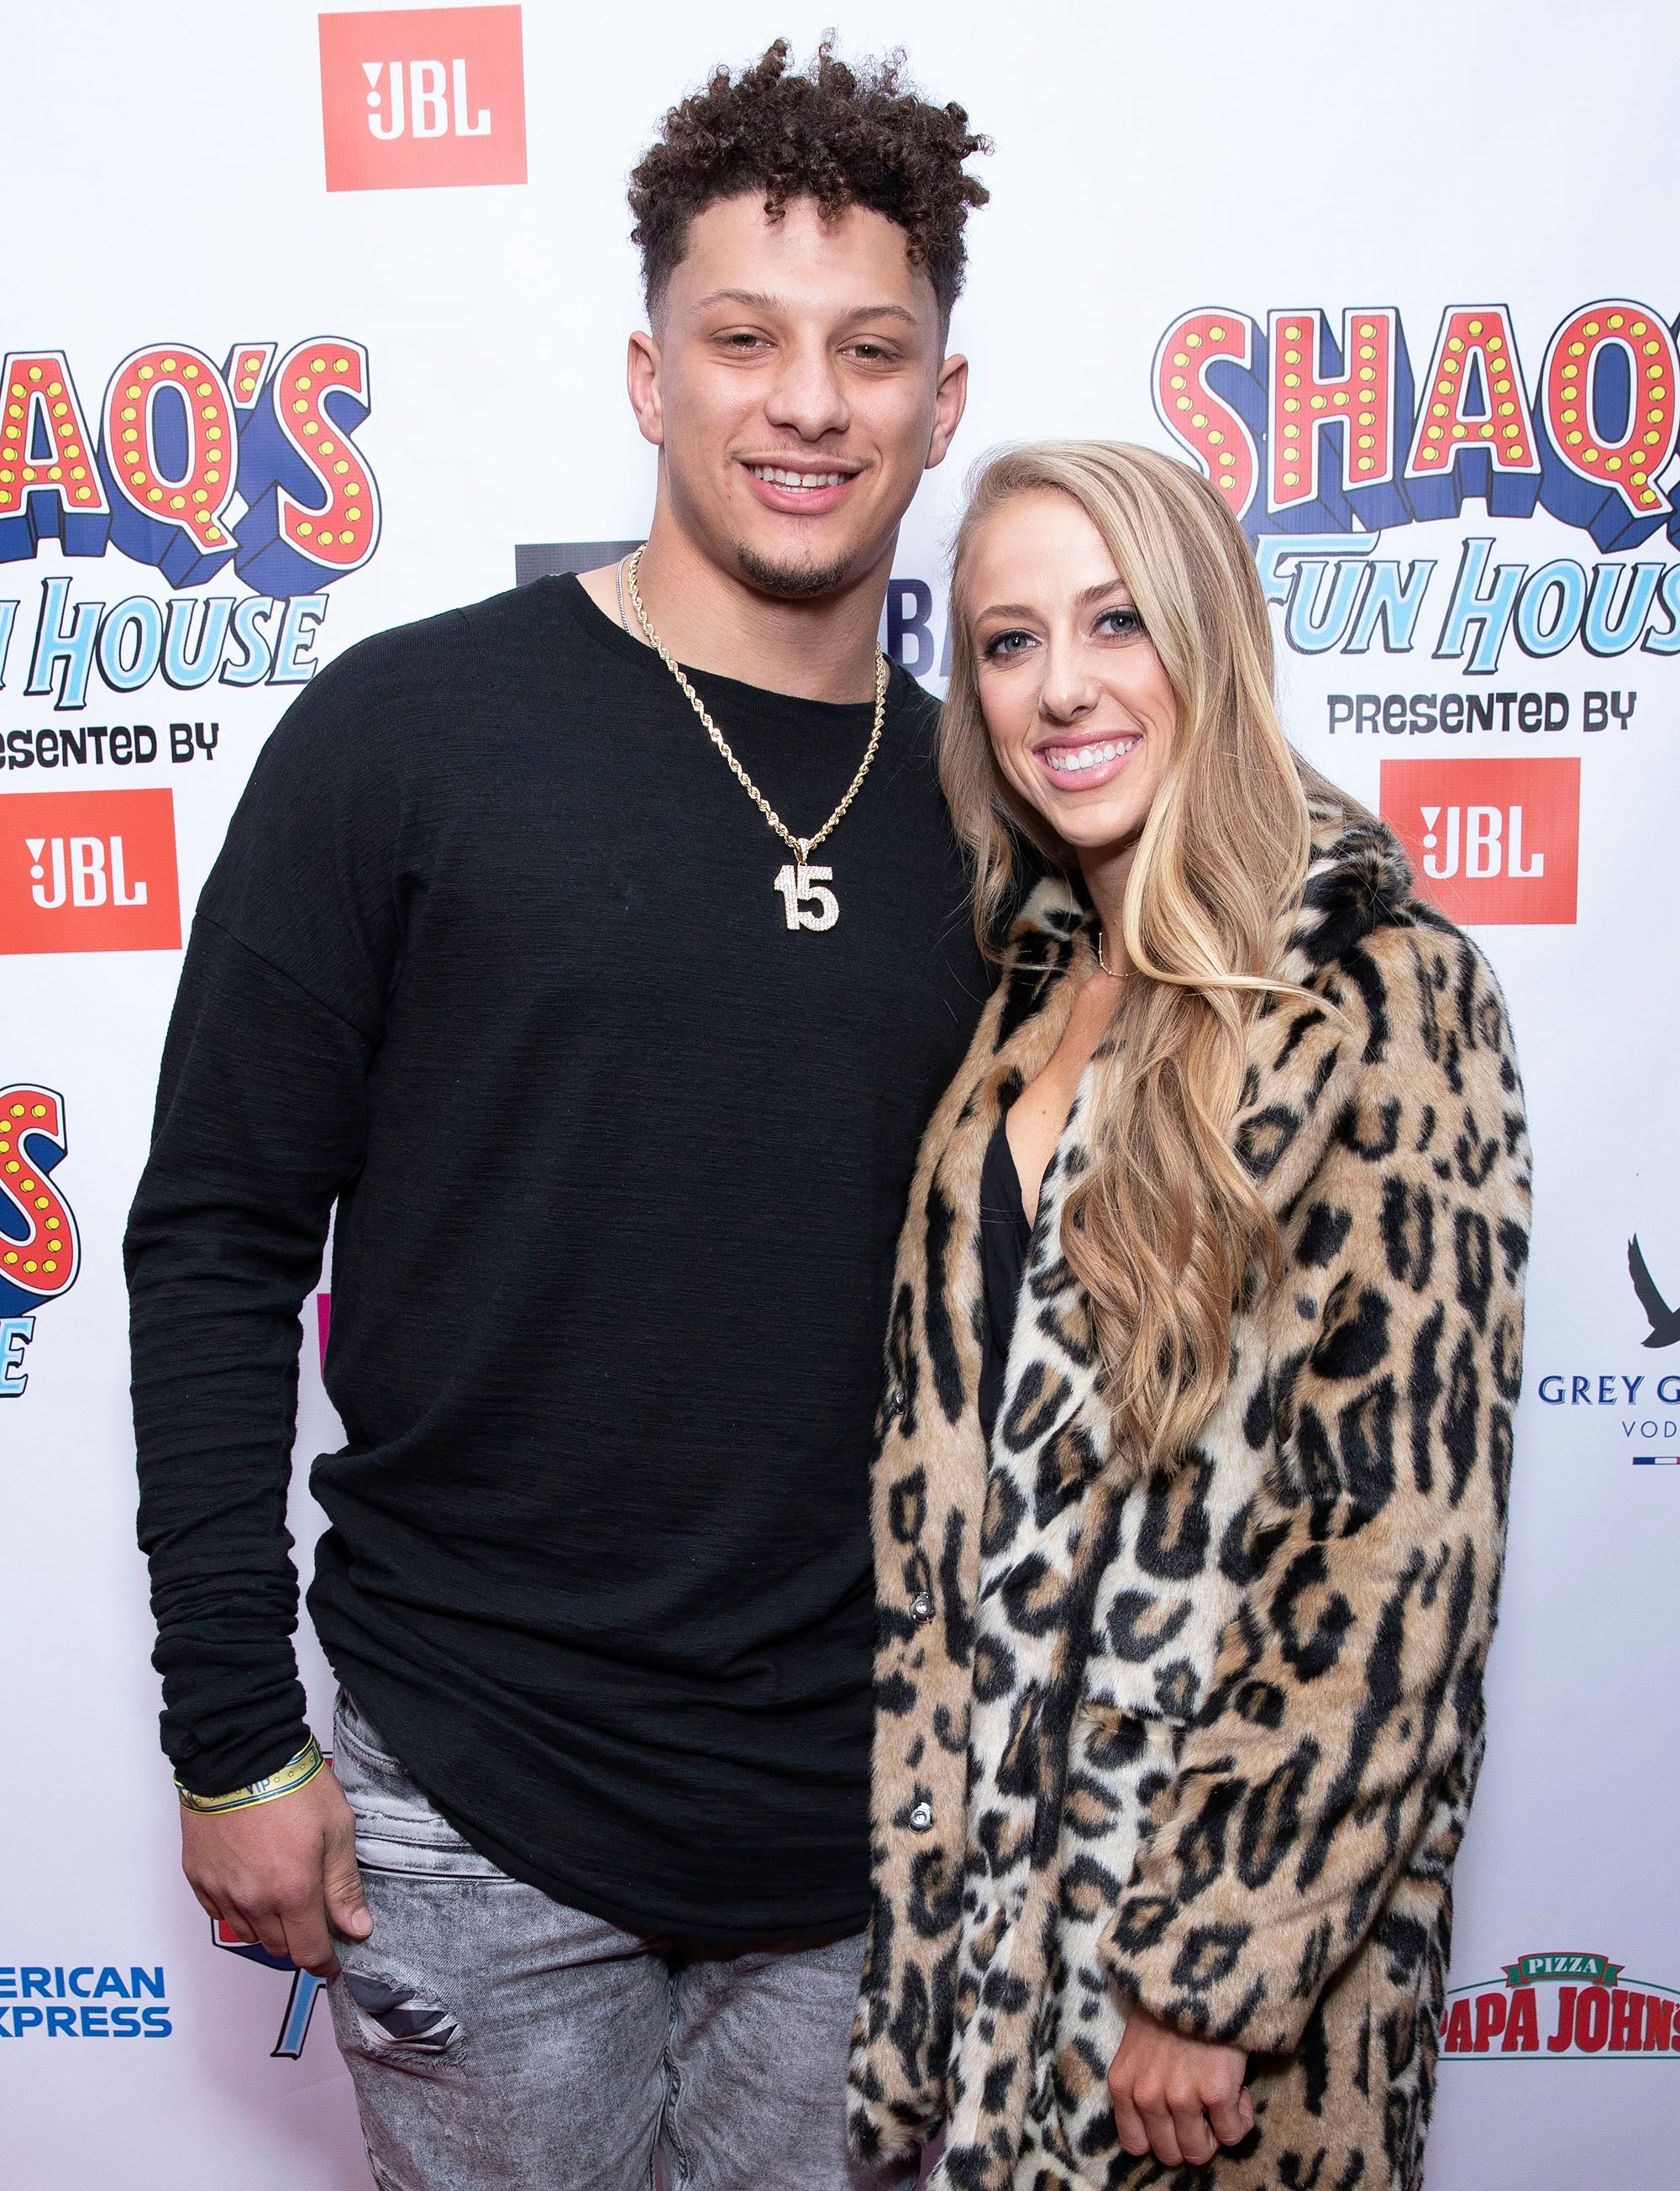 Patrick and Brittany Mahomes Bring Sequins & Plaid to Ring